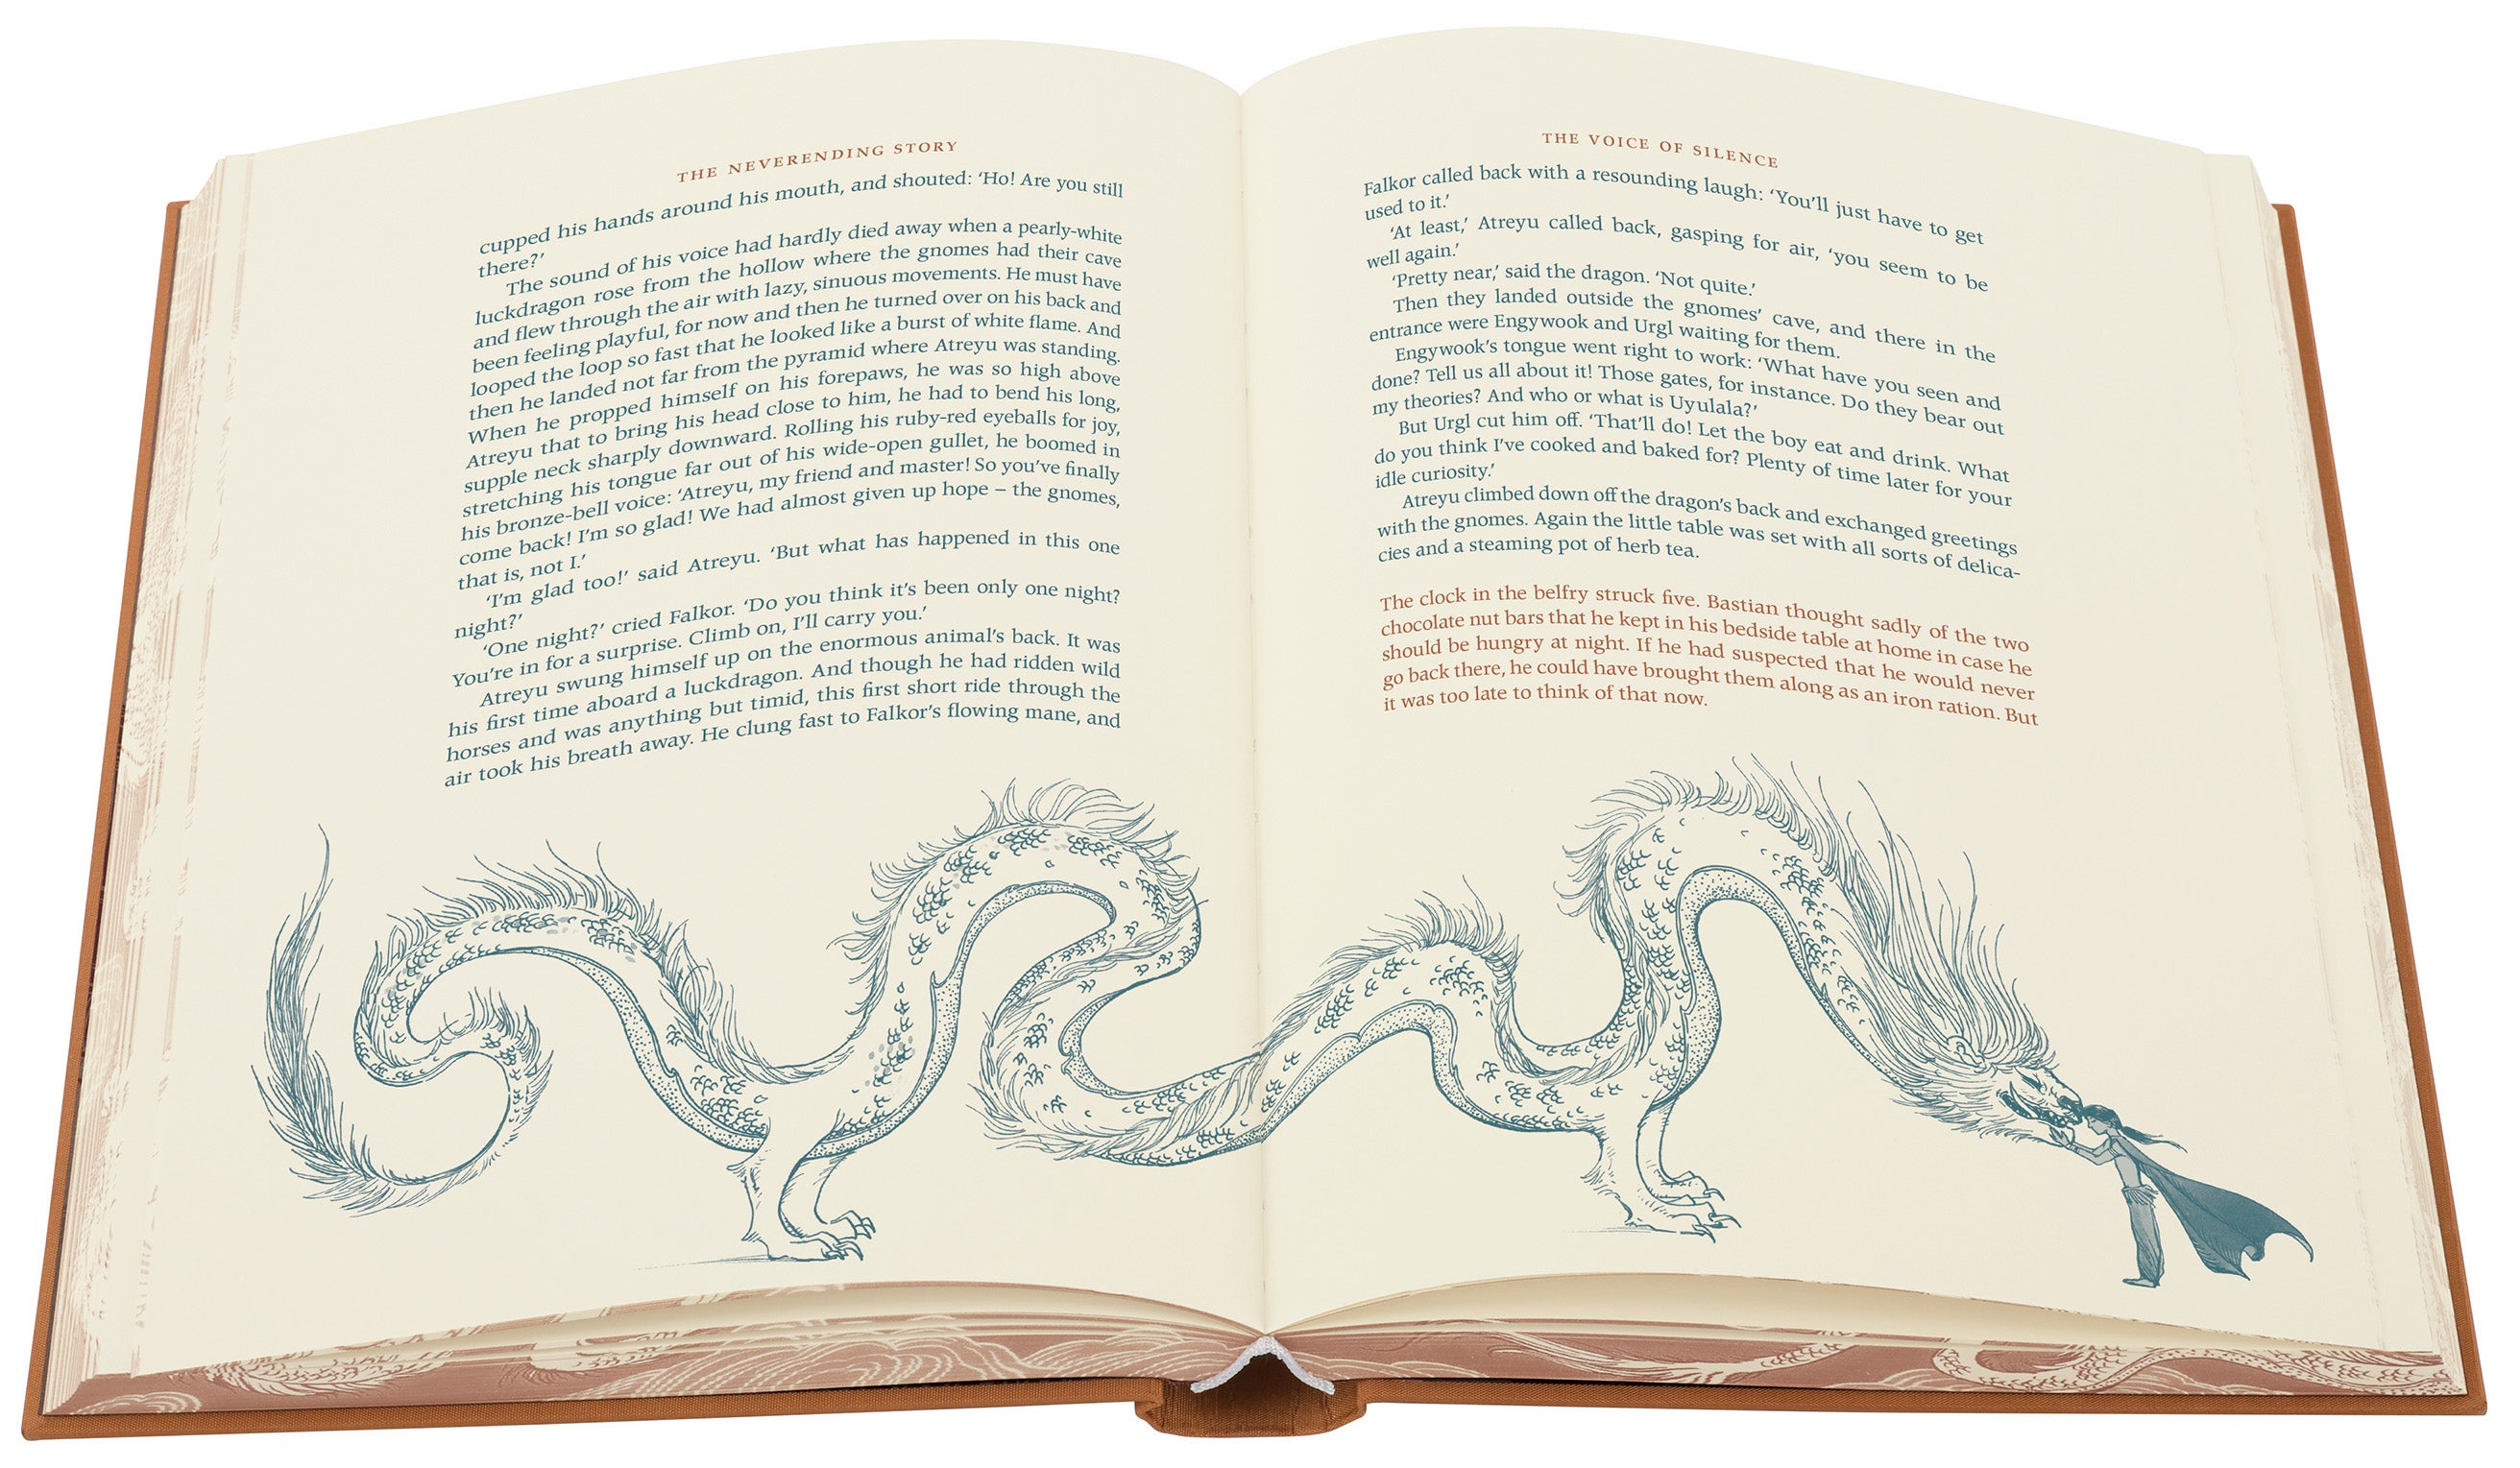 Image: Illustrations and cover design ©Marie-Alice Harel for The Folio Society’s edition of Michael Ende’s The Neverending Story.